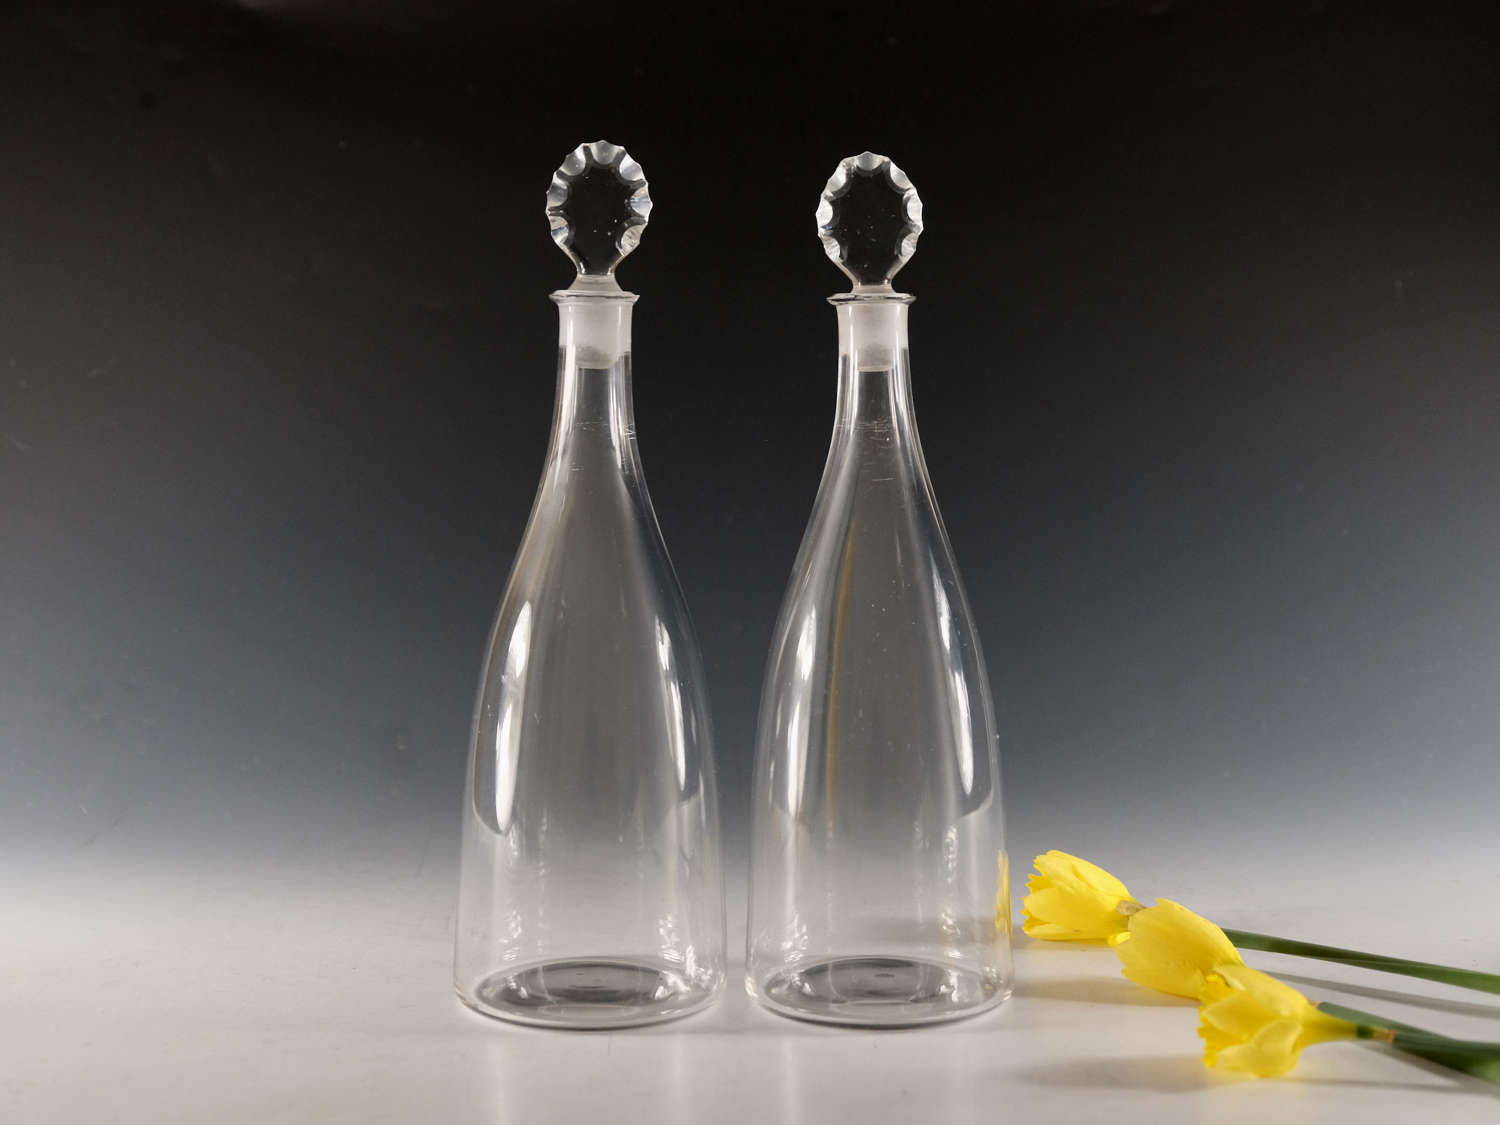 Antique glass taper decanters pair English 1780